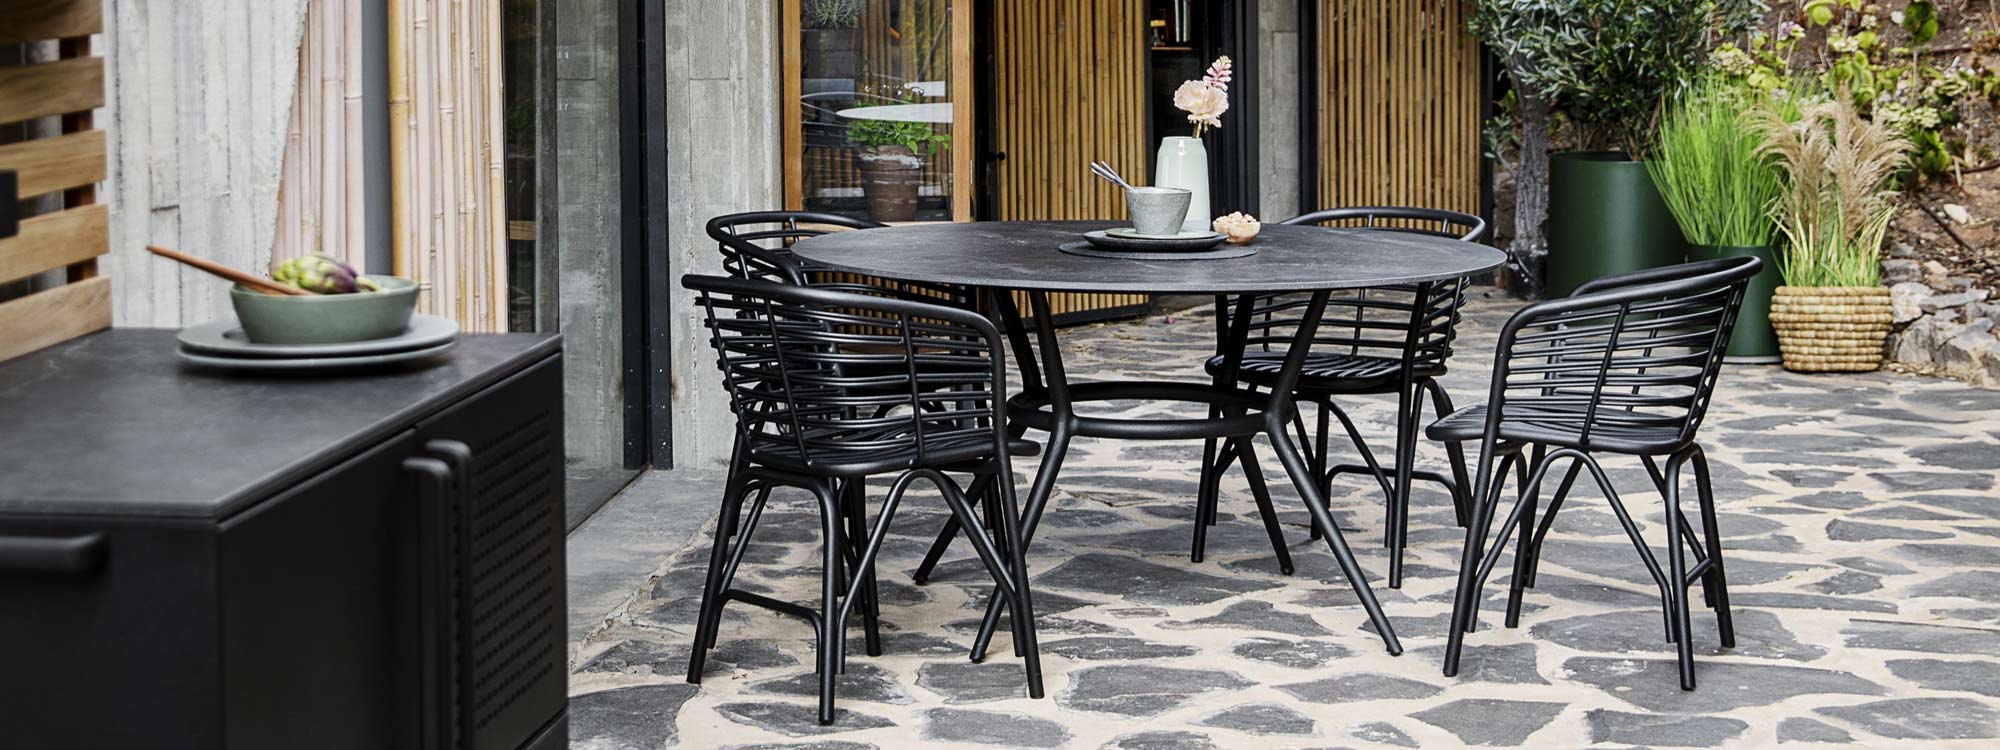 Image of Joy circular garden table with black Fossil ceramic top, together with Lava-grey blend chairs by Cane-line